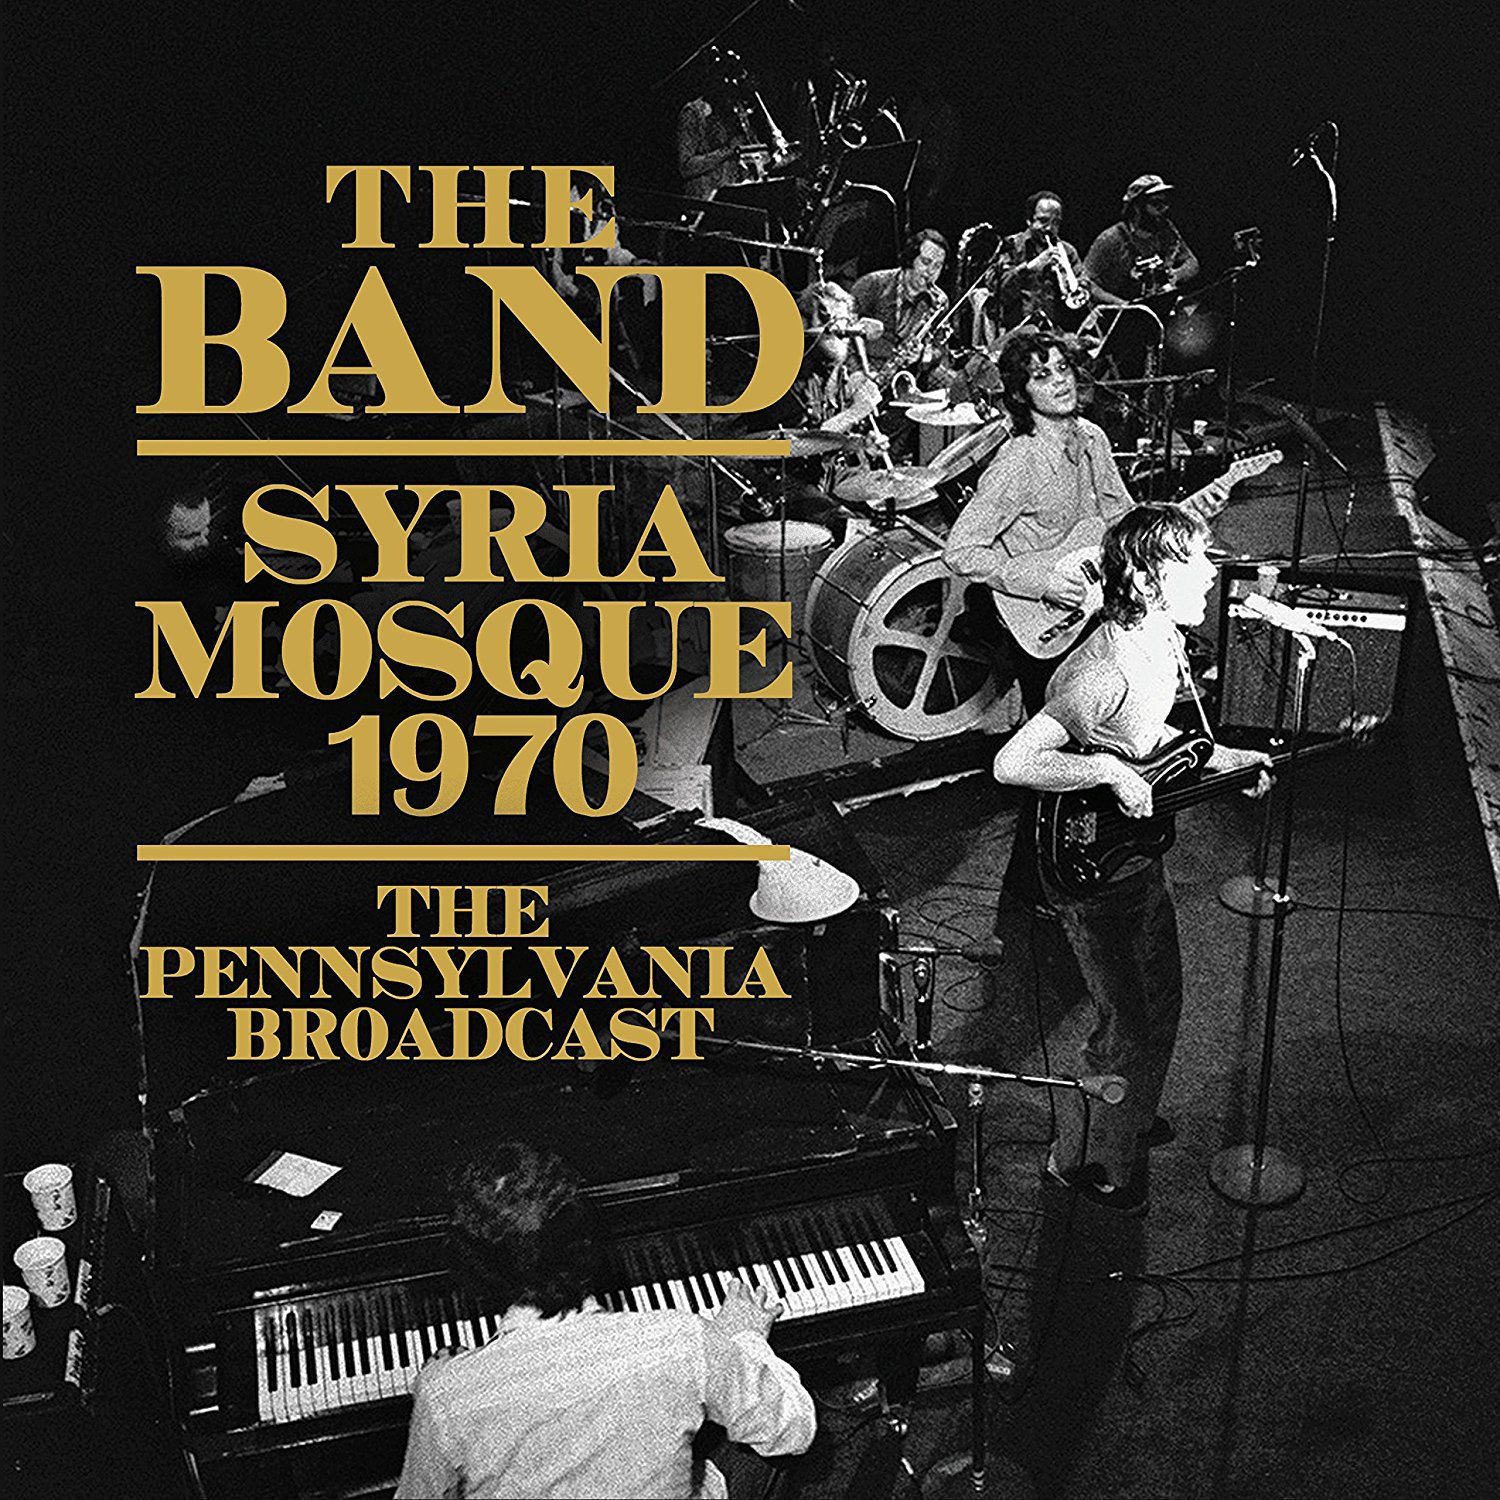 Vinyl Record The Band - Syria Mosque 1970 (2 LP)